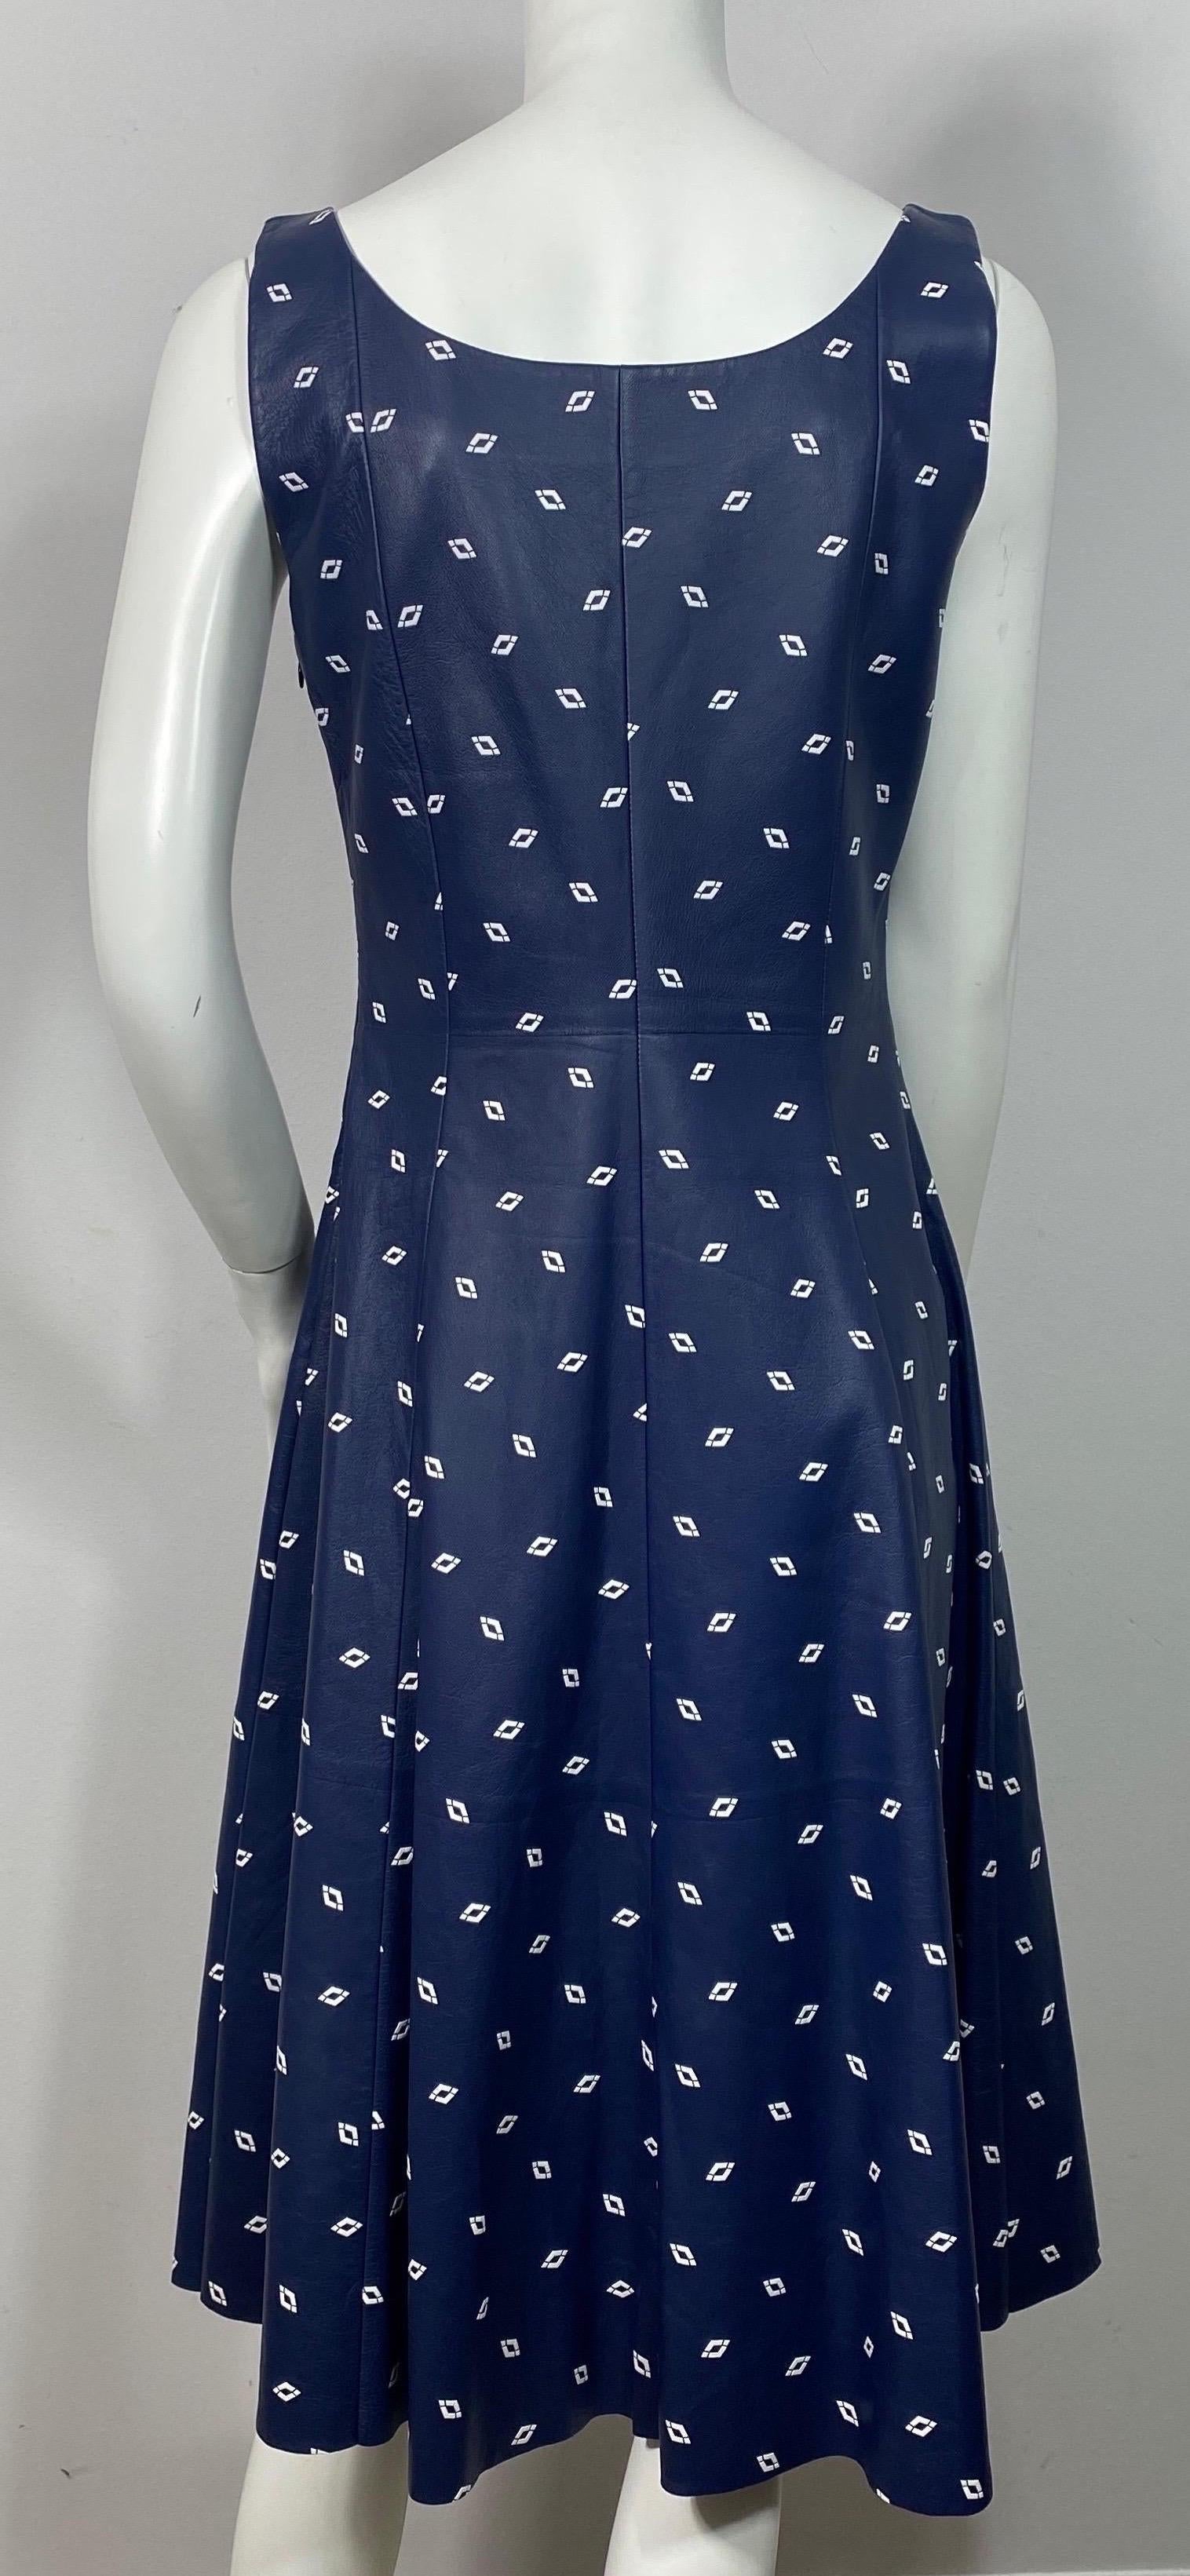 Ralph Lauren Purple Label Navy and White Leather Dress - Size 10 For Sale 4